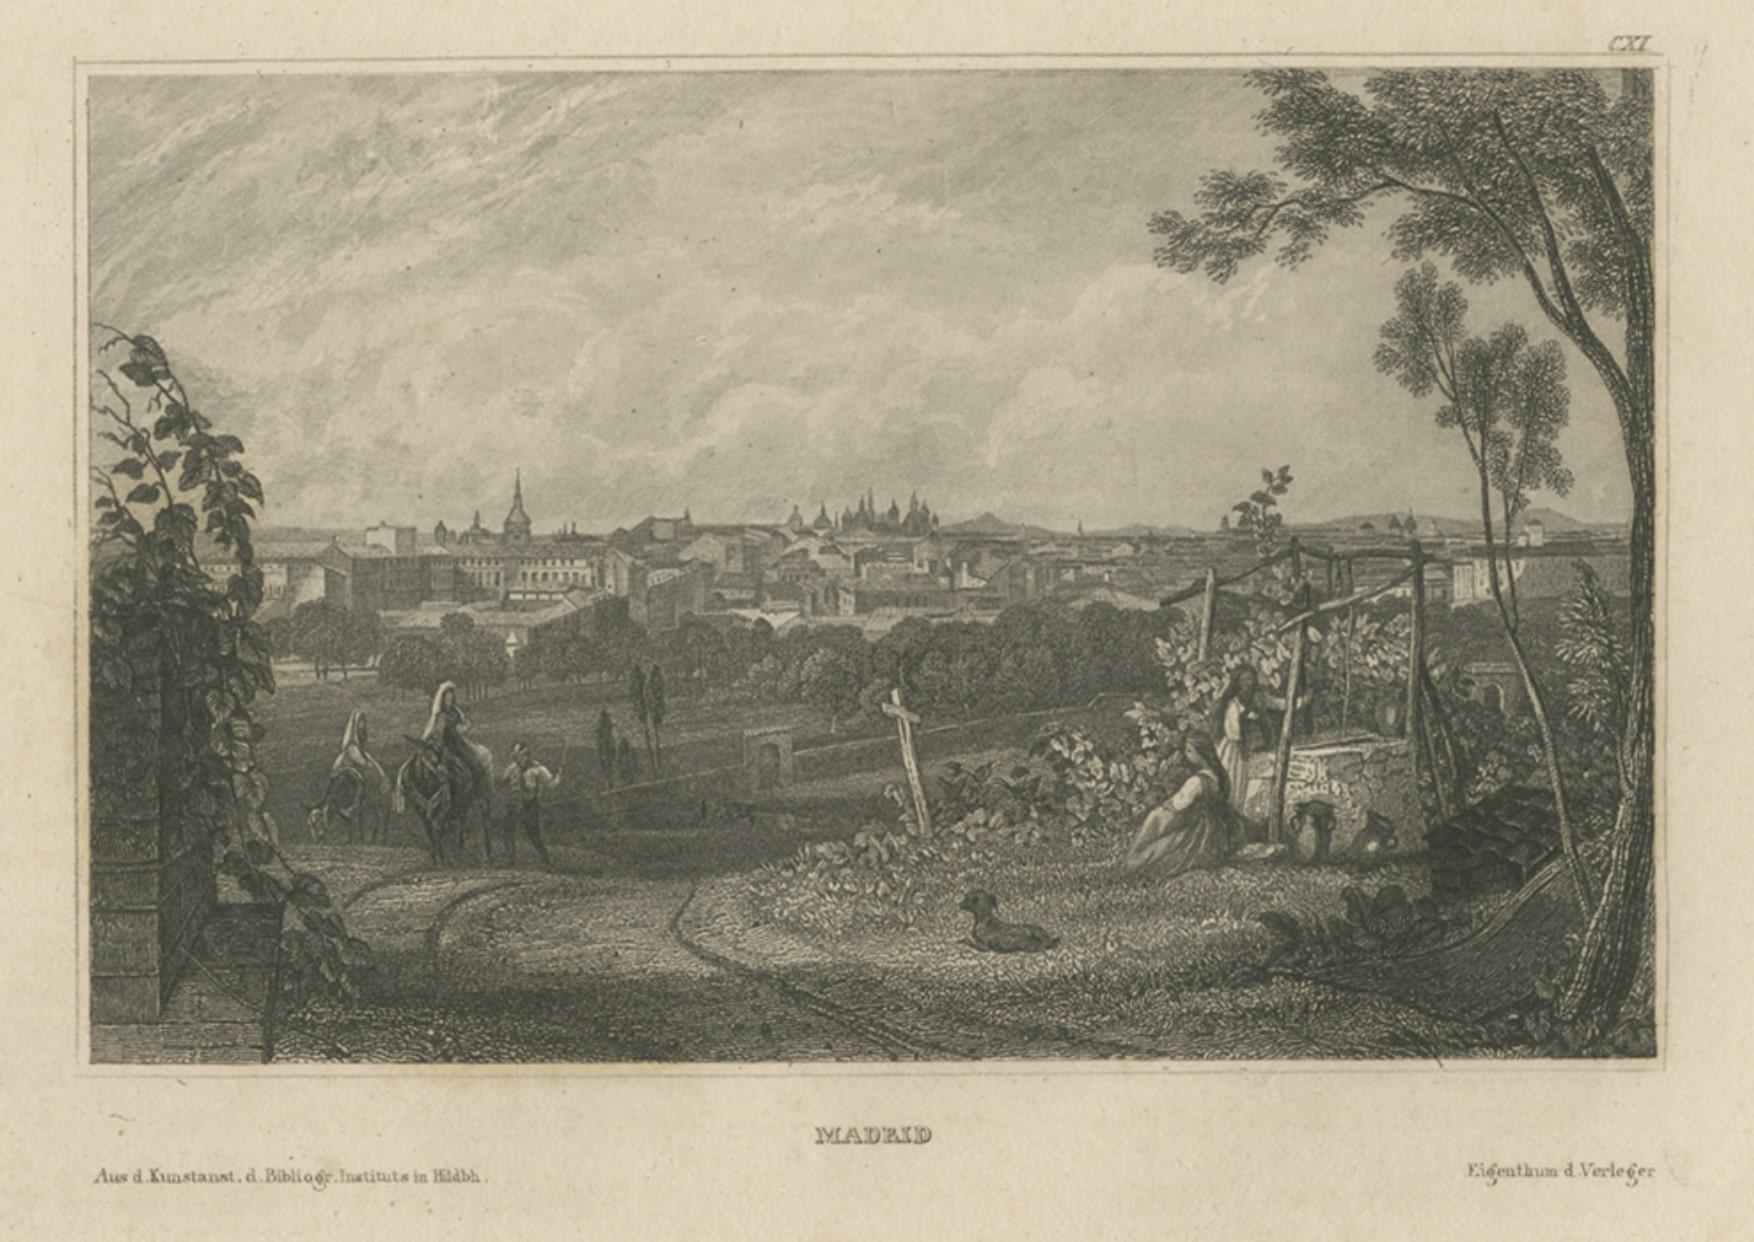 Paper Antique Print of Madrid in Spain, 1836 For Sale